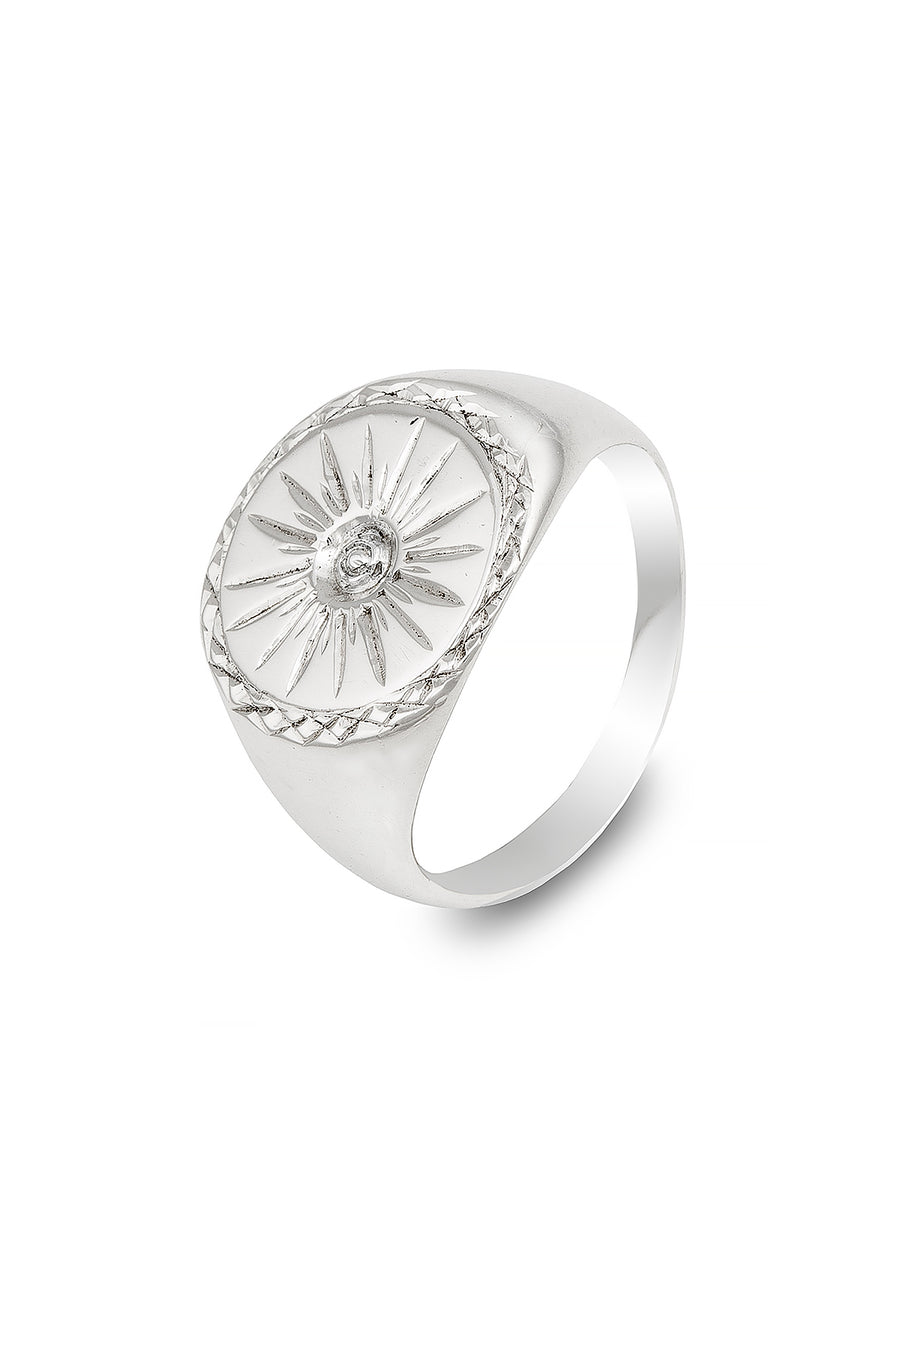 "StarBurst" Silver Signet Ring - The Collective Dublin